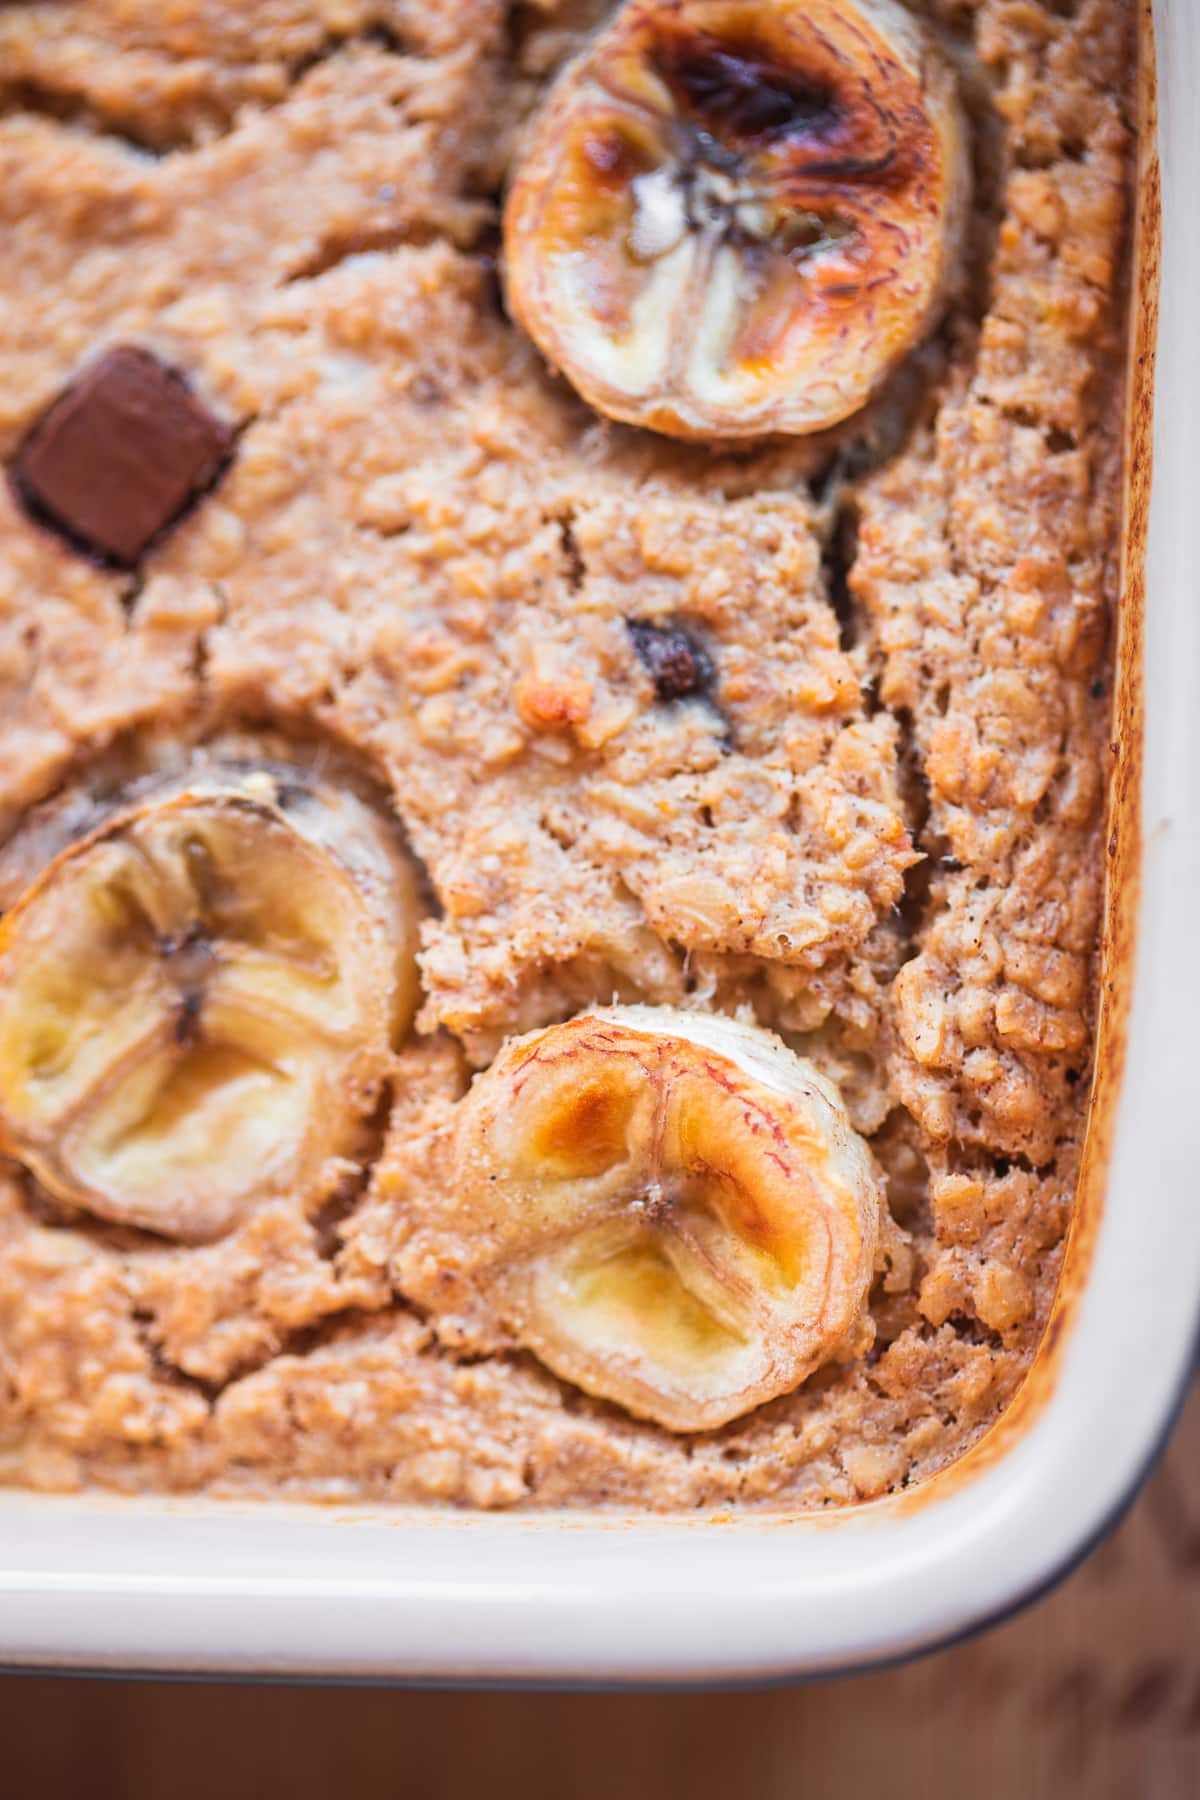 Vegan chocolate chip baked oats with banana